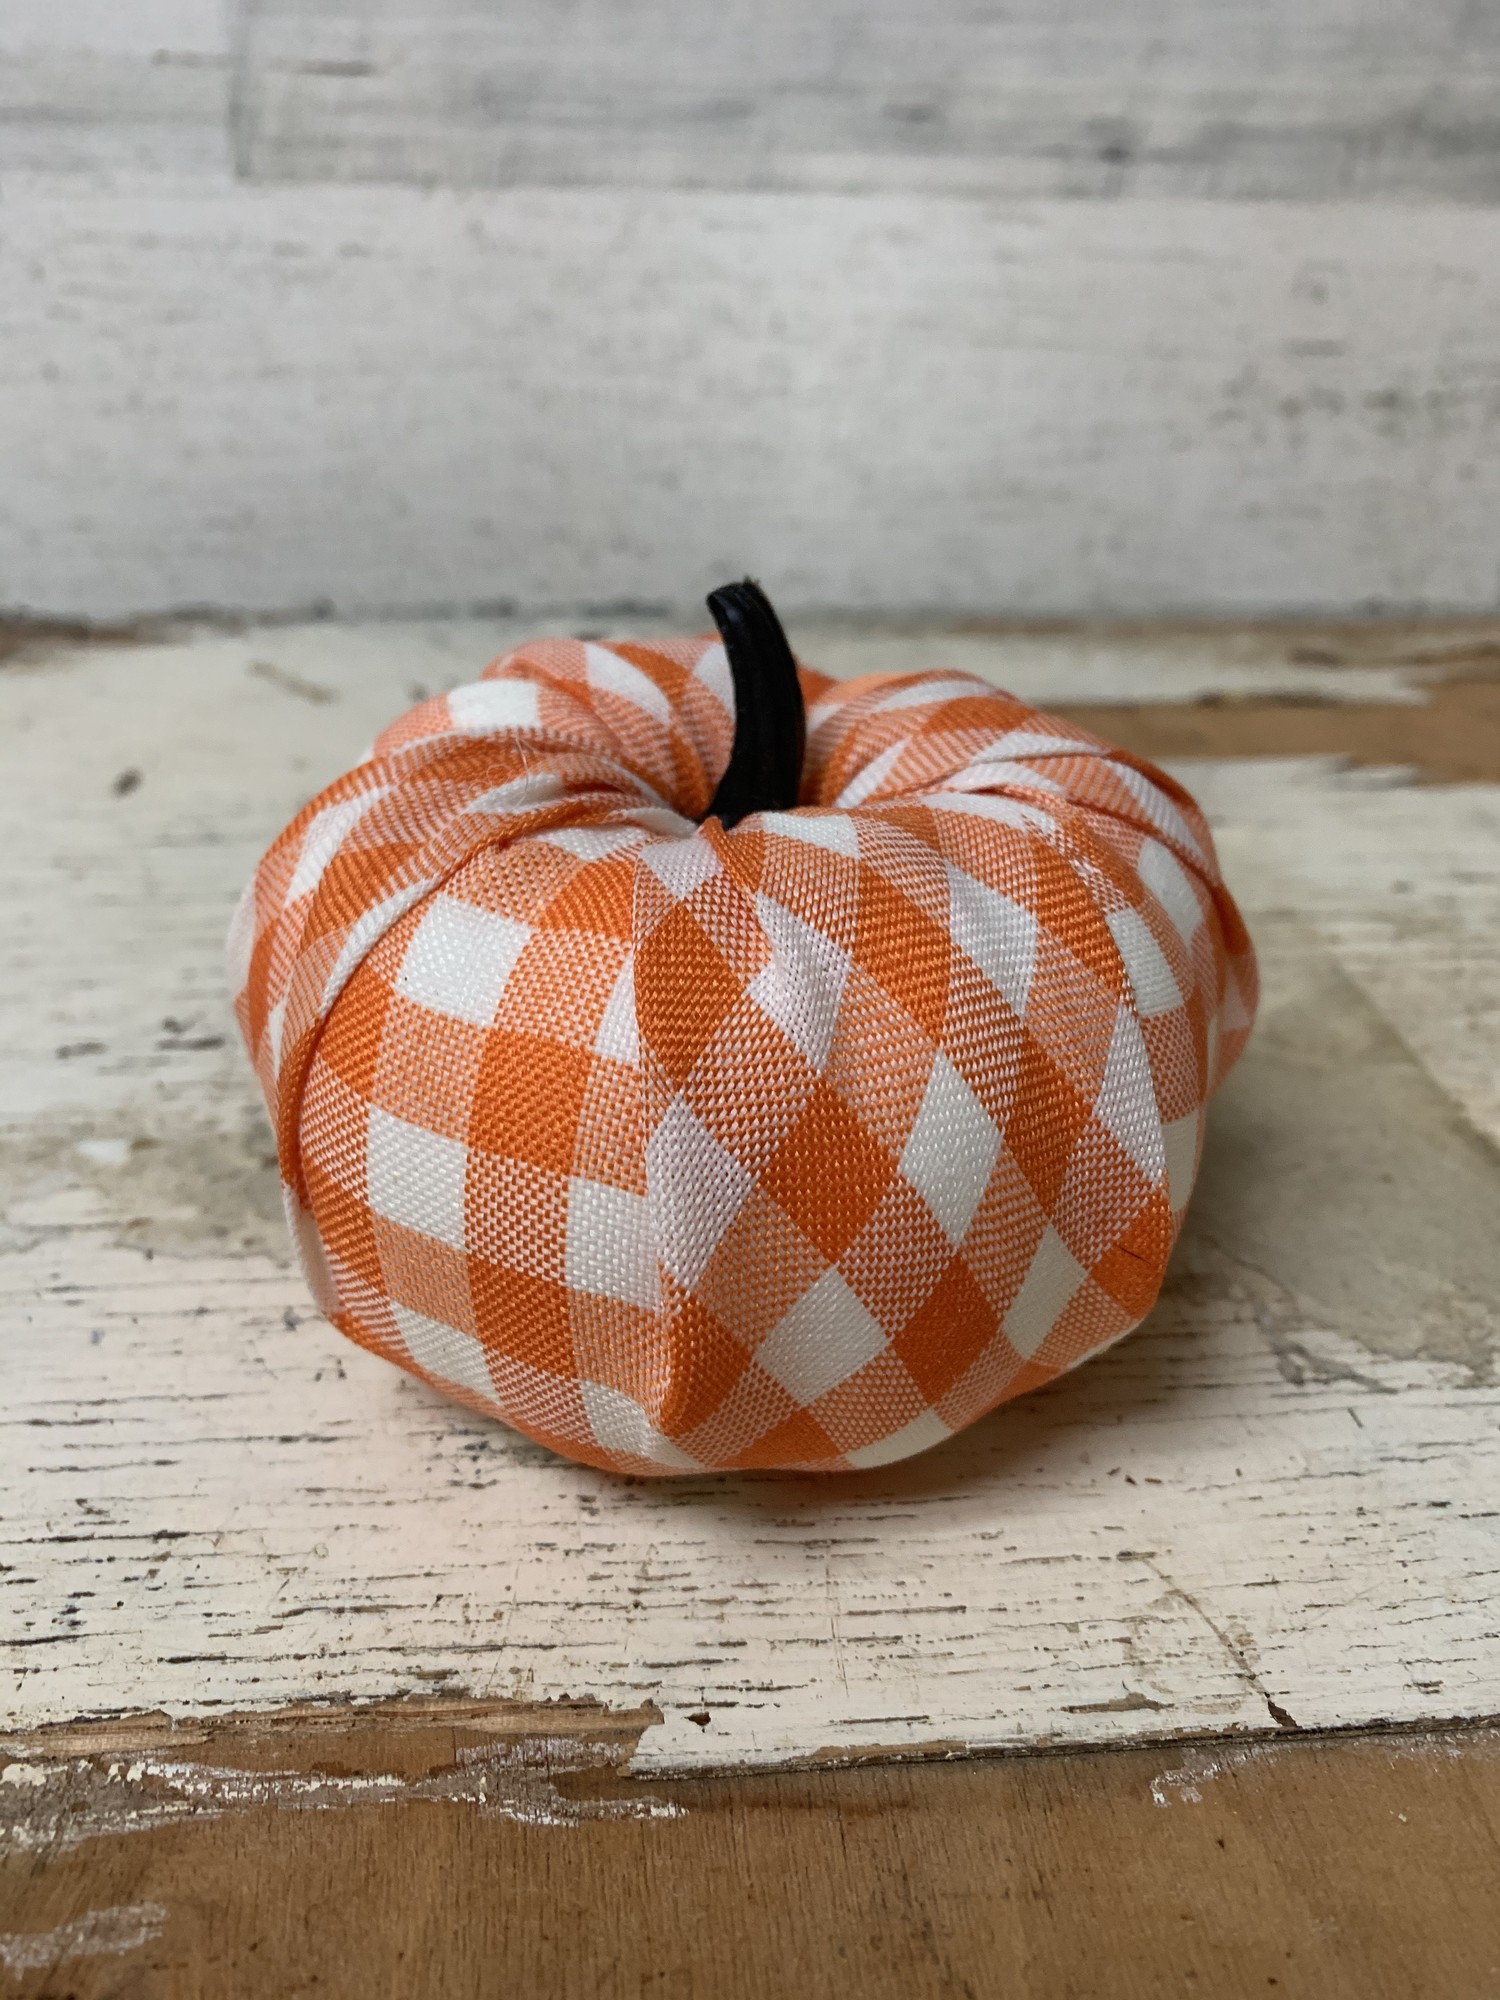 Add a sweet, decorative touch to your fall decor with this Orange  Buffalo Check Fabric Pumpkin.
Perfect little centerpiece, accent, diy projects.  It will definitely welcome fall into you house with style.
Measures approx 3 1/4'' and  3 1/2'' wide.
Please make sure to look at all the pictures!
Thank you so much!